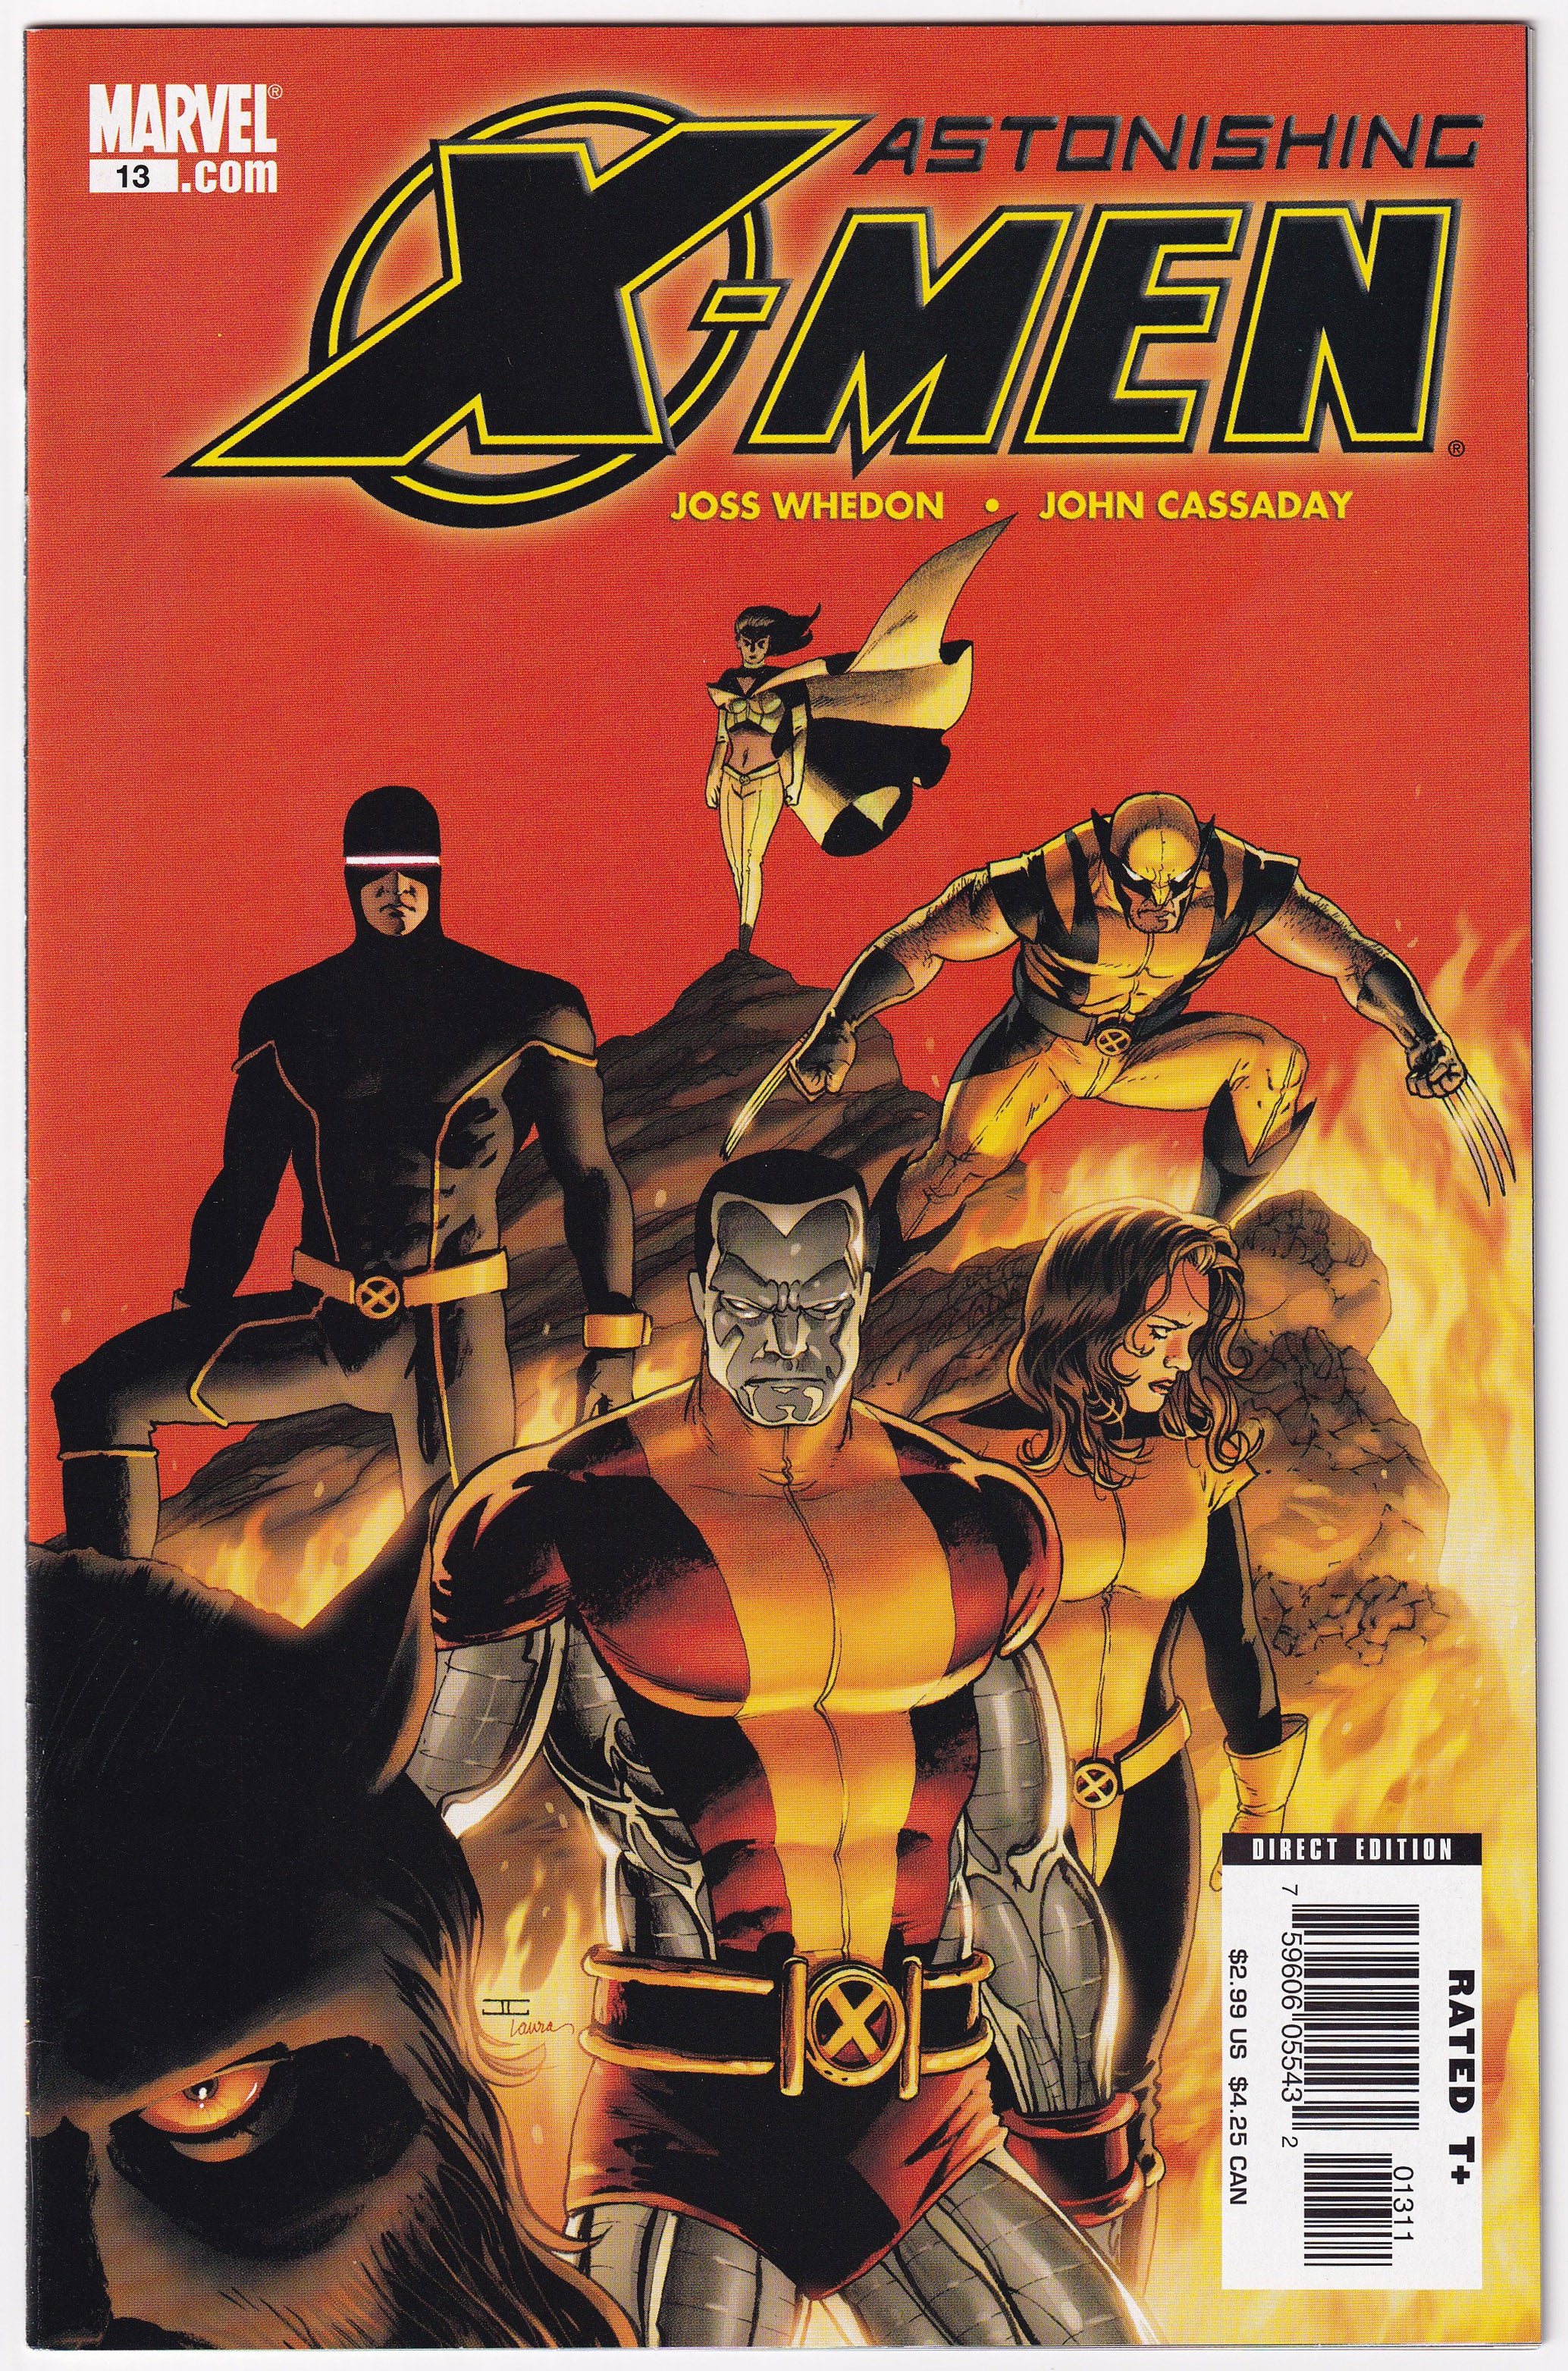 Photo of Astonishing X-Men, Vol. 3 (2006)  Iss 13A Near Mint  Comic sold by Stronghold Collectibles